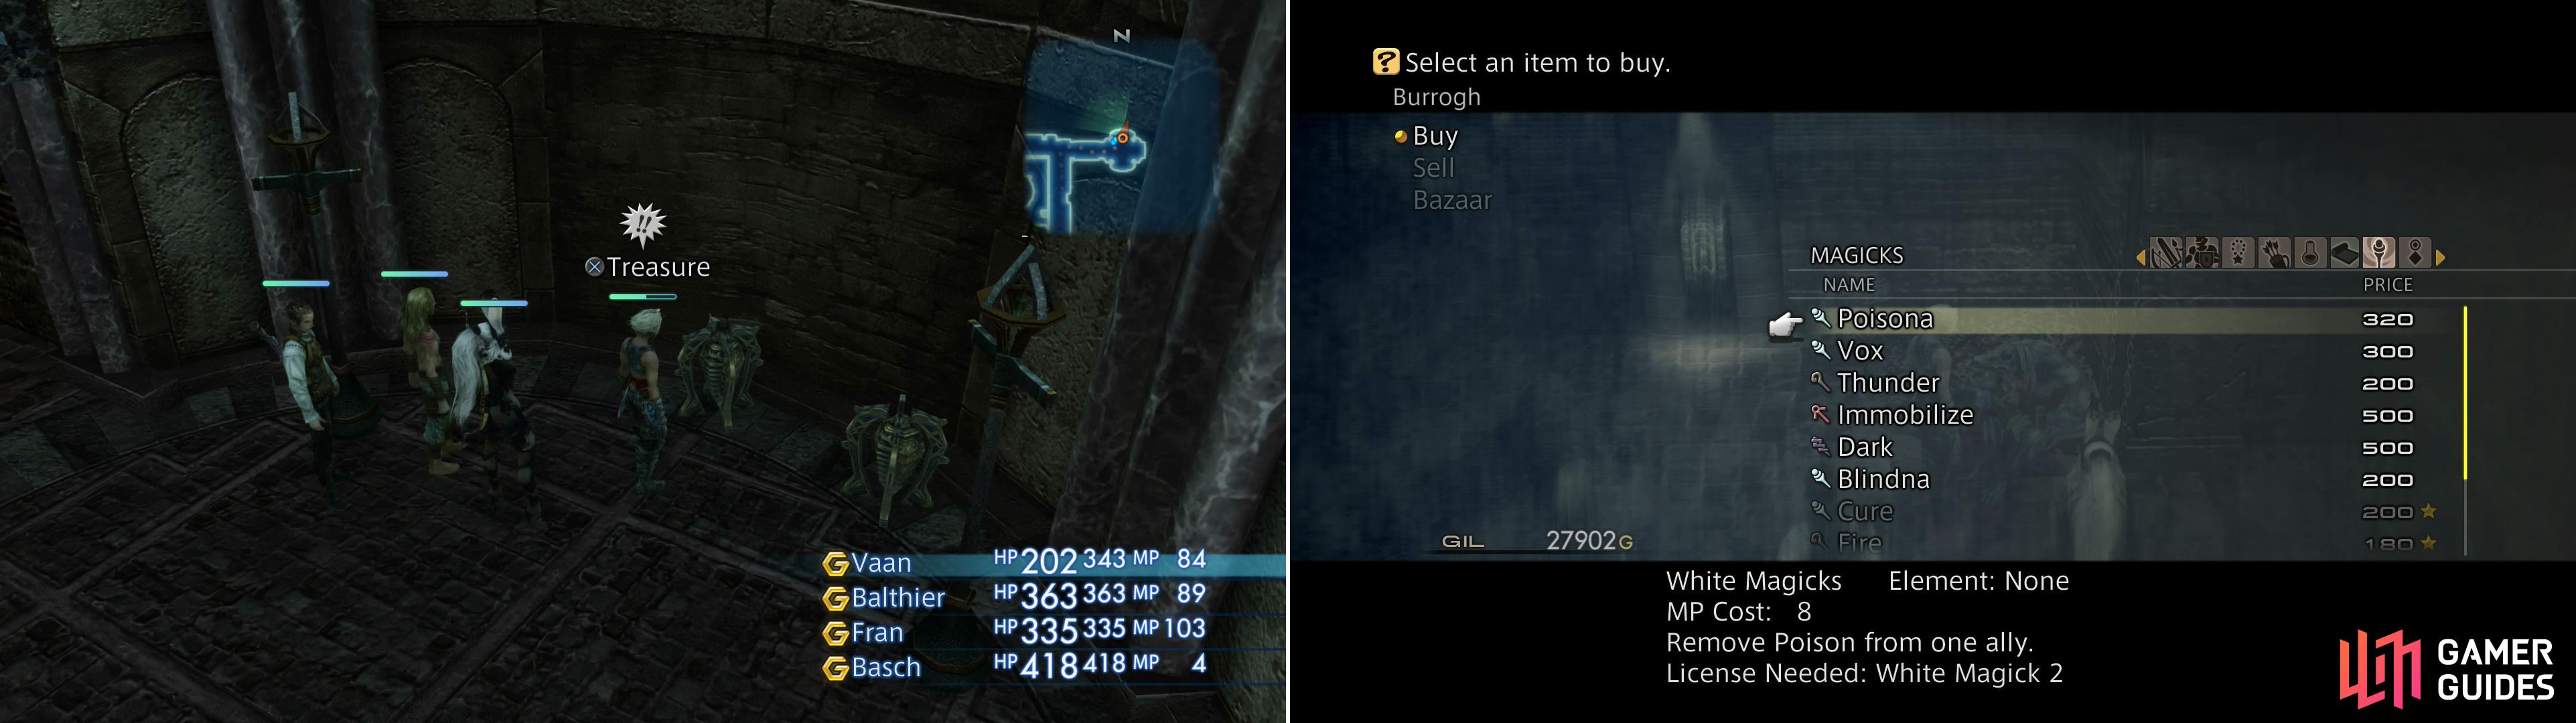 Loot the treasure chests in a dead-end passage, one of which possesses a great deal or Gil (left). Visit the Bangaa merchant Burrogh to sell off loot and buy a few new spells (right).